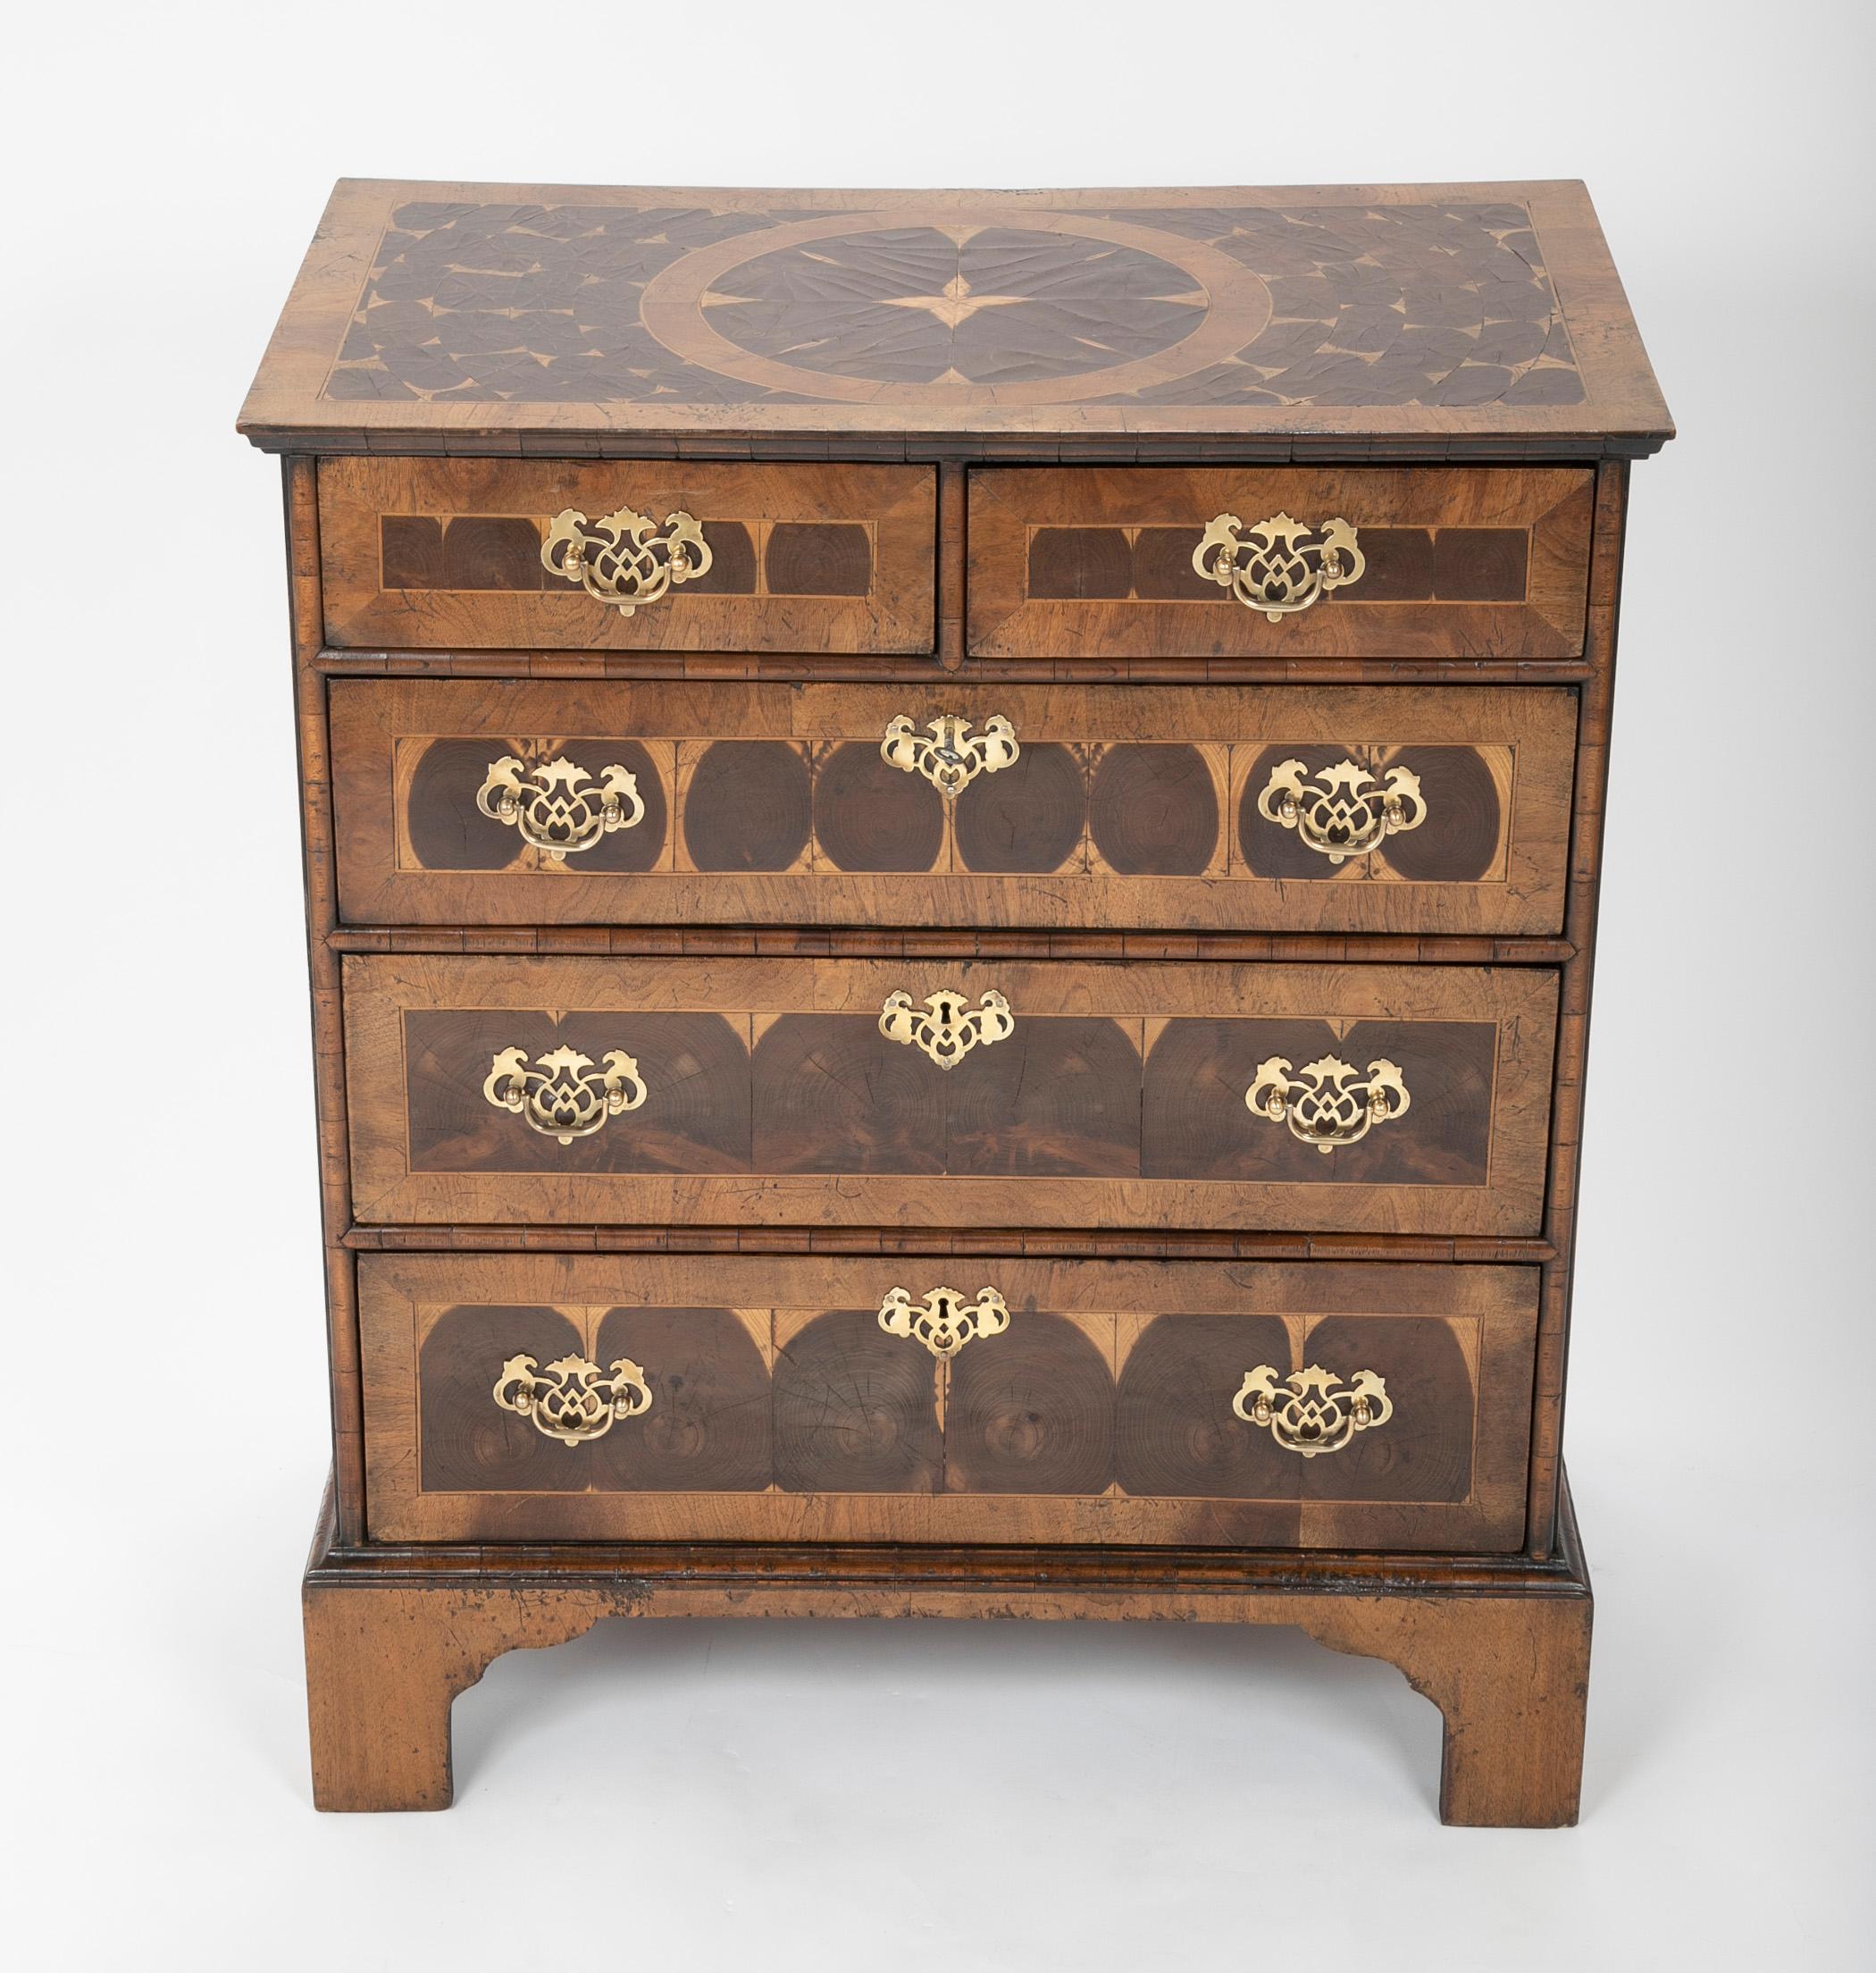 A very handsome antique chest of drawers with stunning oyster veneer and pierced brass hardware. The perfect size for an apartment, or a wonderful and useful accent piece for any home. This is the item people will ask about when they step into your